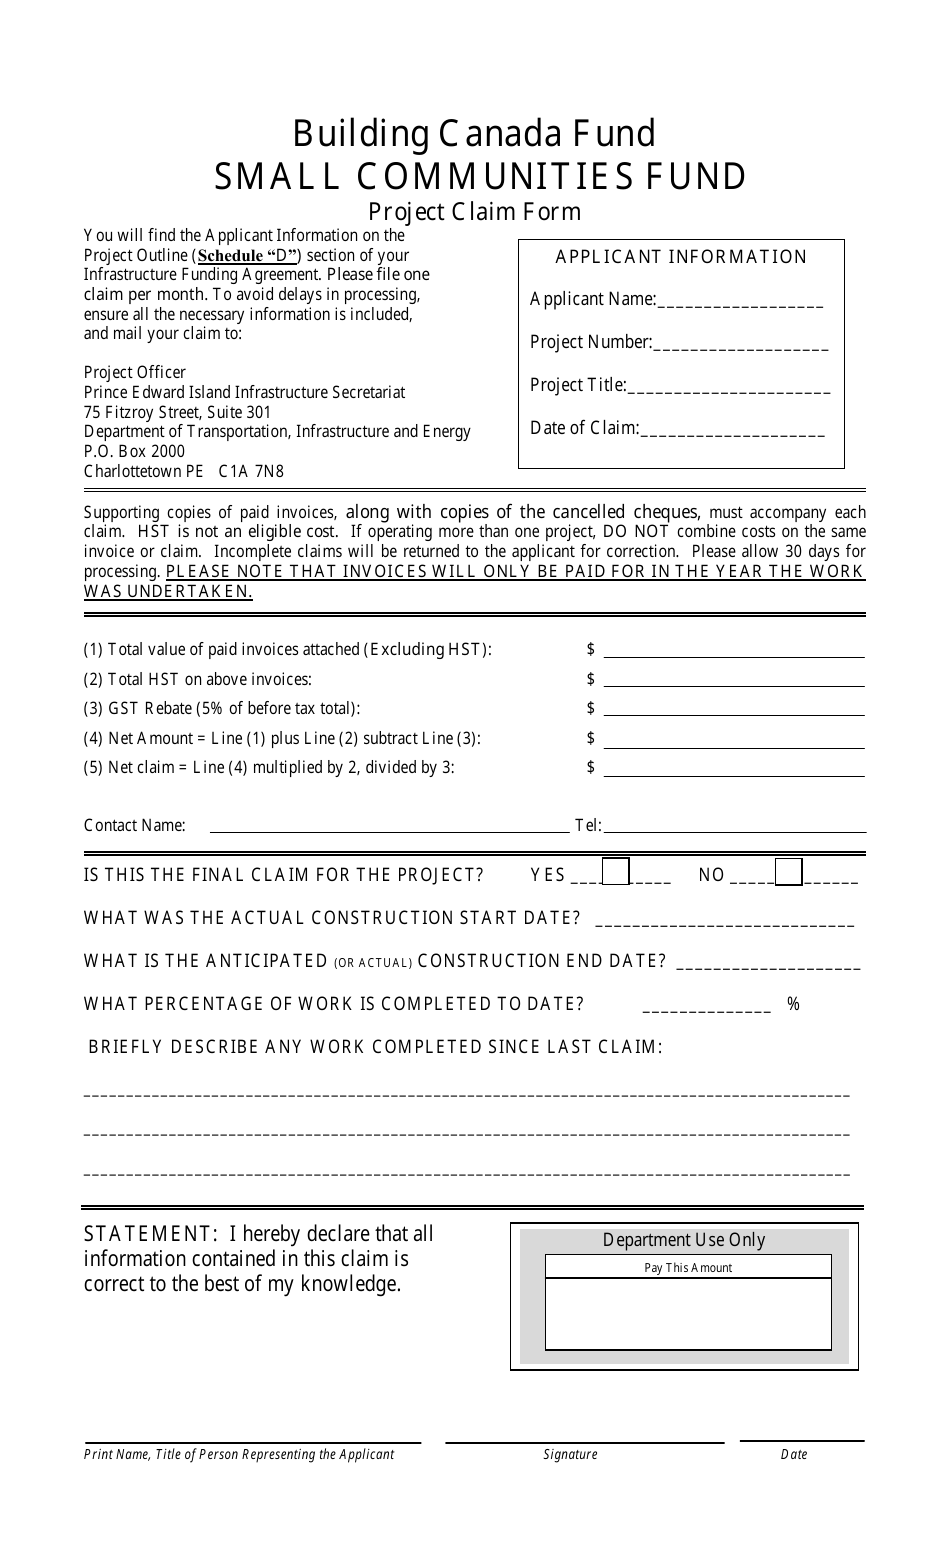 Small Communities Fund Project Claim Form - Prince Edward Island, Canada, Page 1